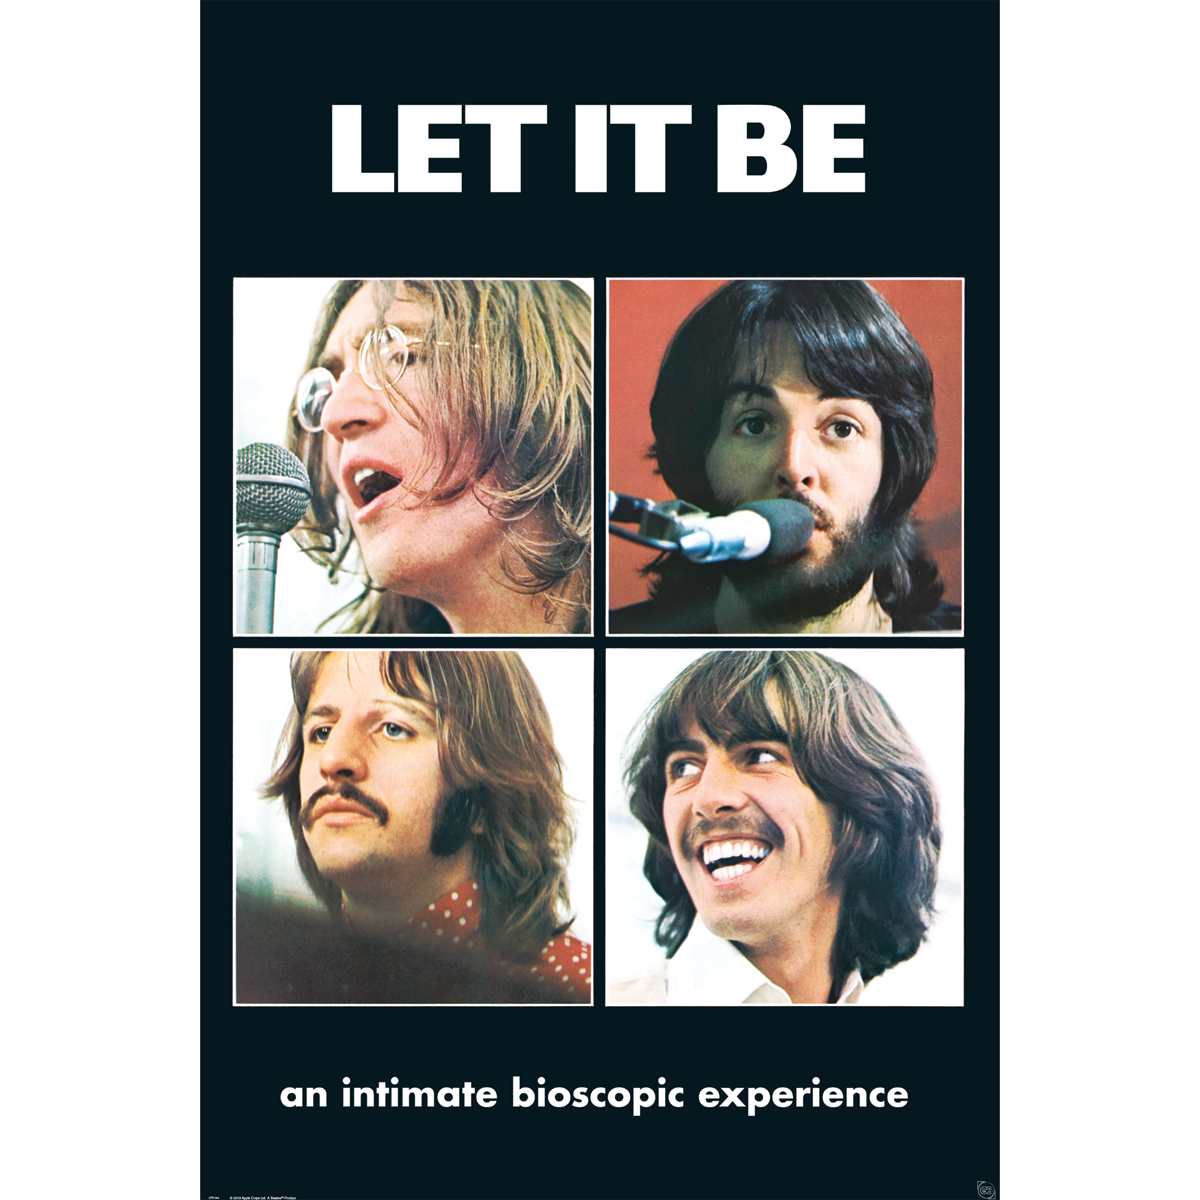 The Beatles - Let it be - Poster - multicolor